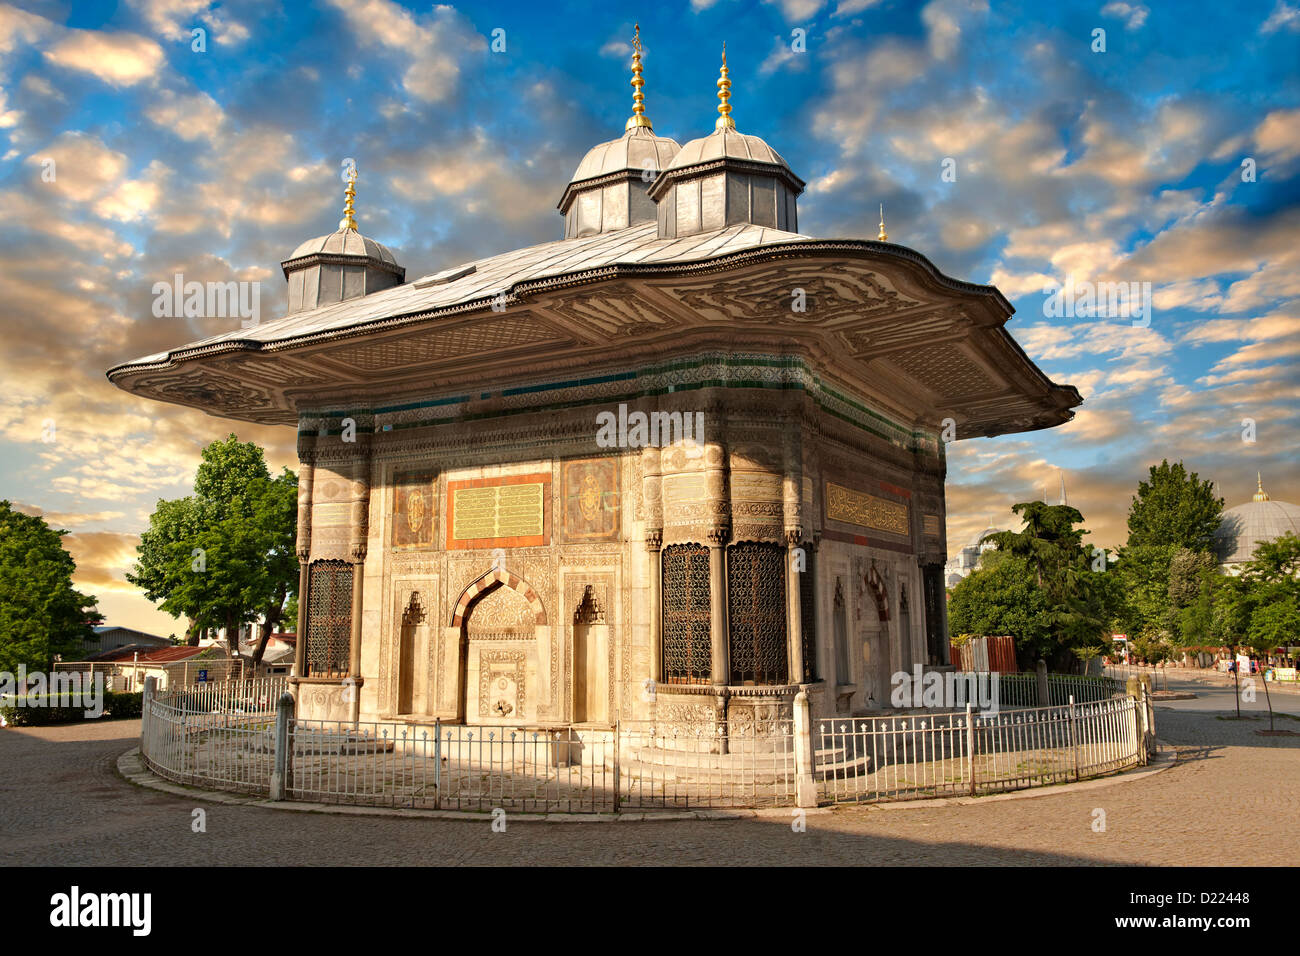 The Fountain of Sultan Ahmed III (Turkish: III. Ahmet Çe.mesi) is a fountain in a Turkish rococo structure built 1728, Istanbul Stock Photo